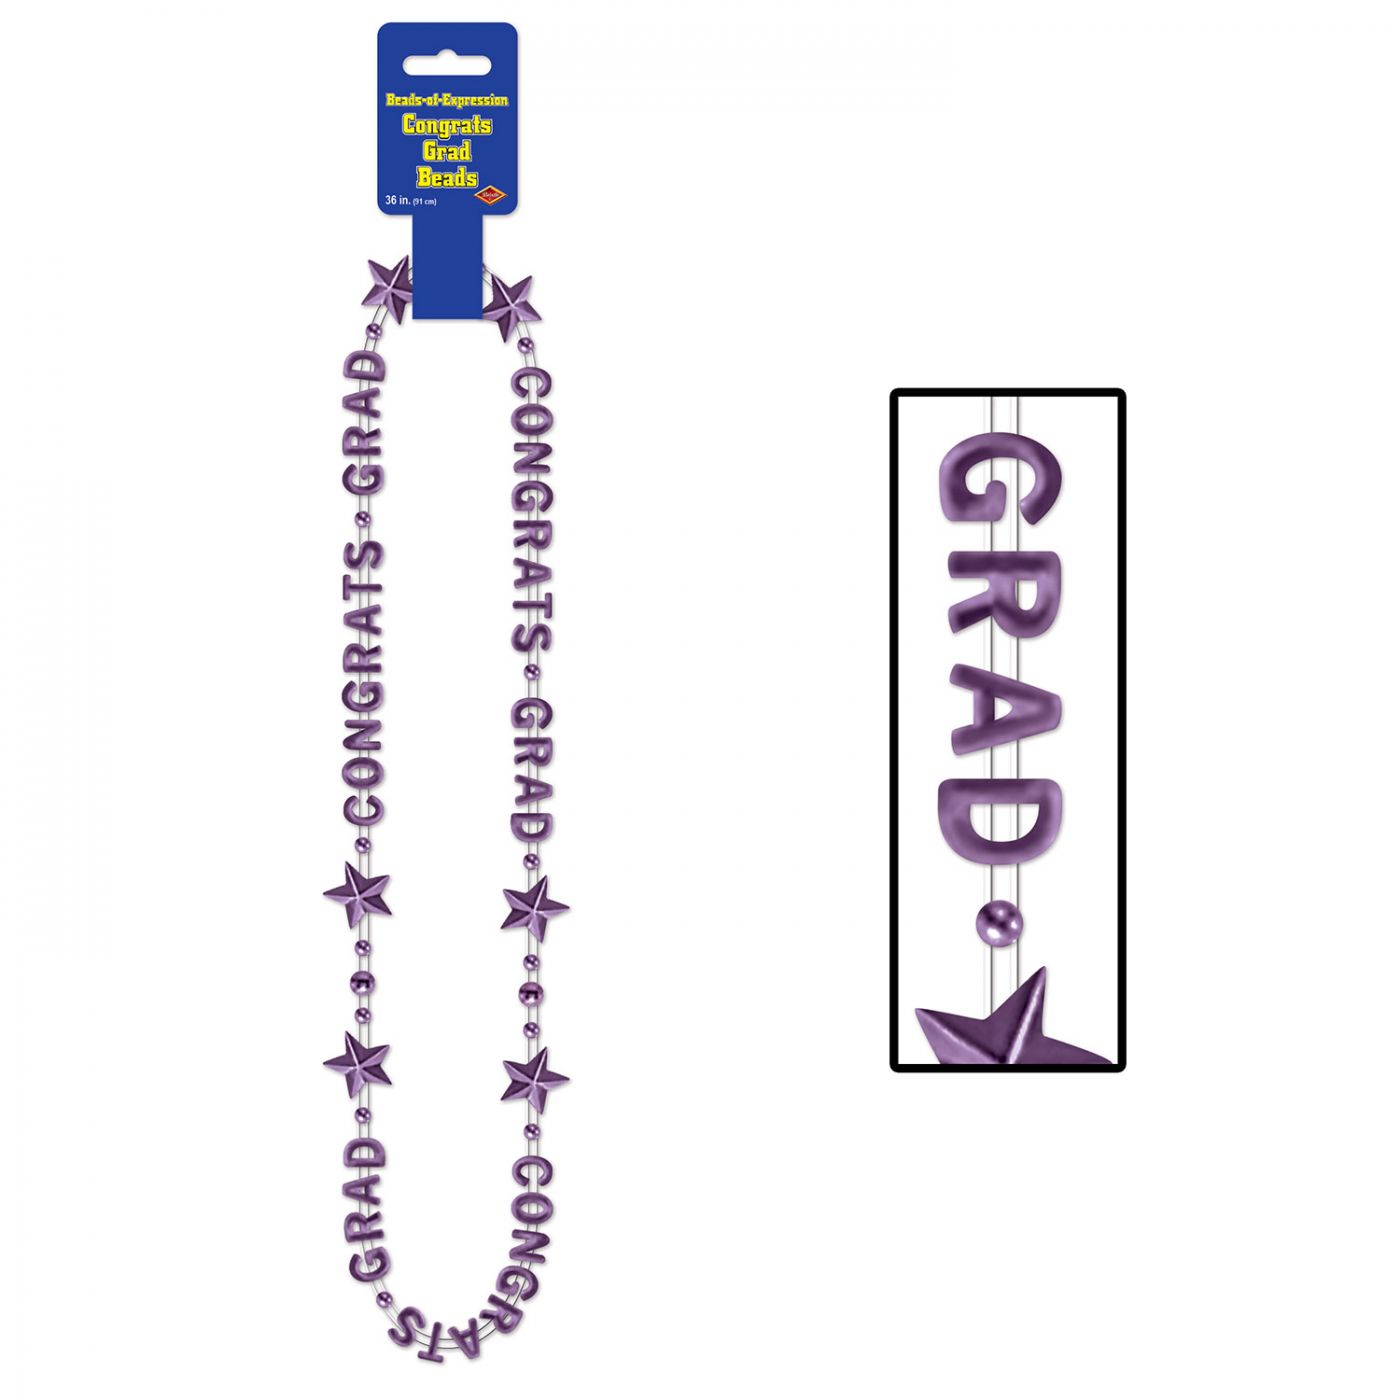 Congrats Grad Beads-Of-Expression image